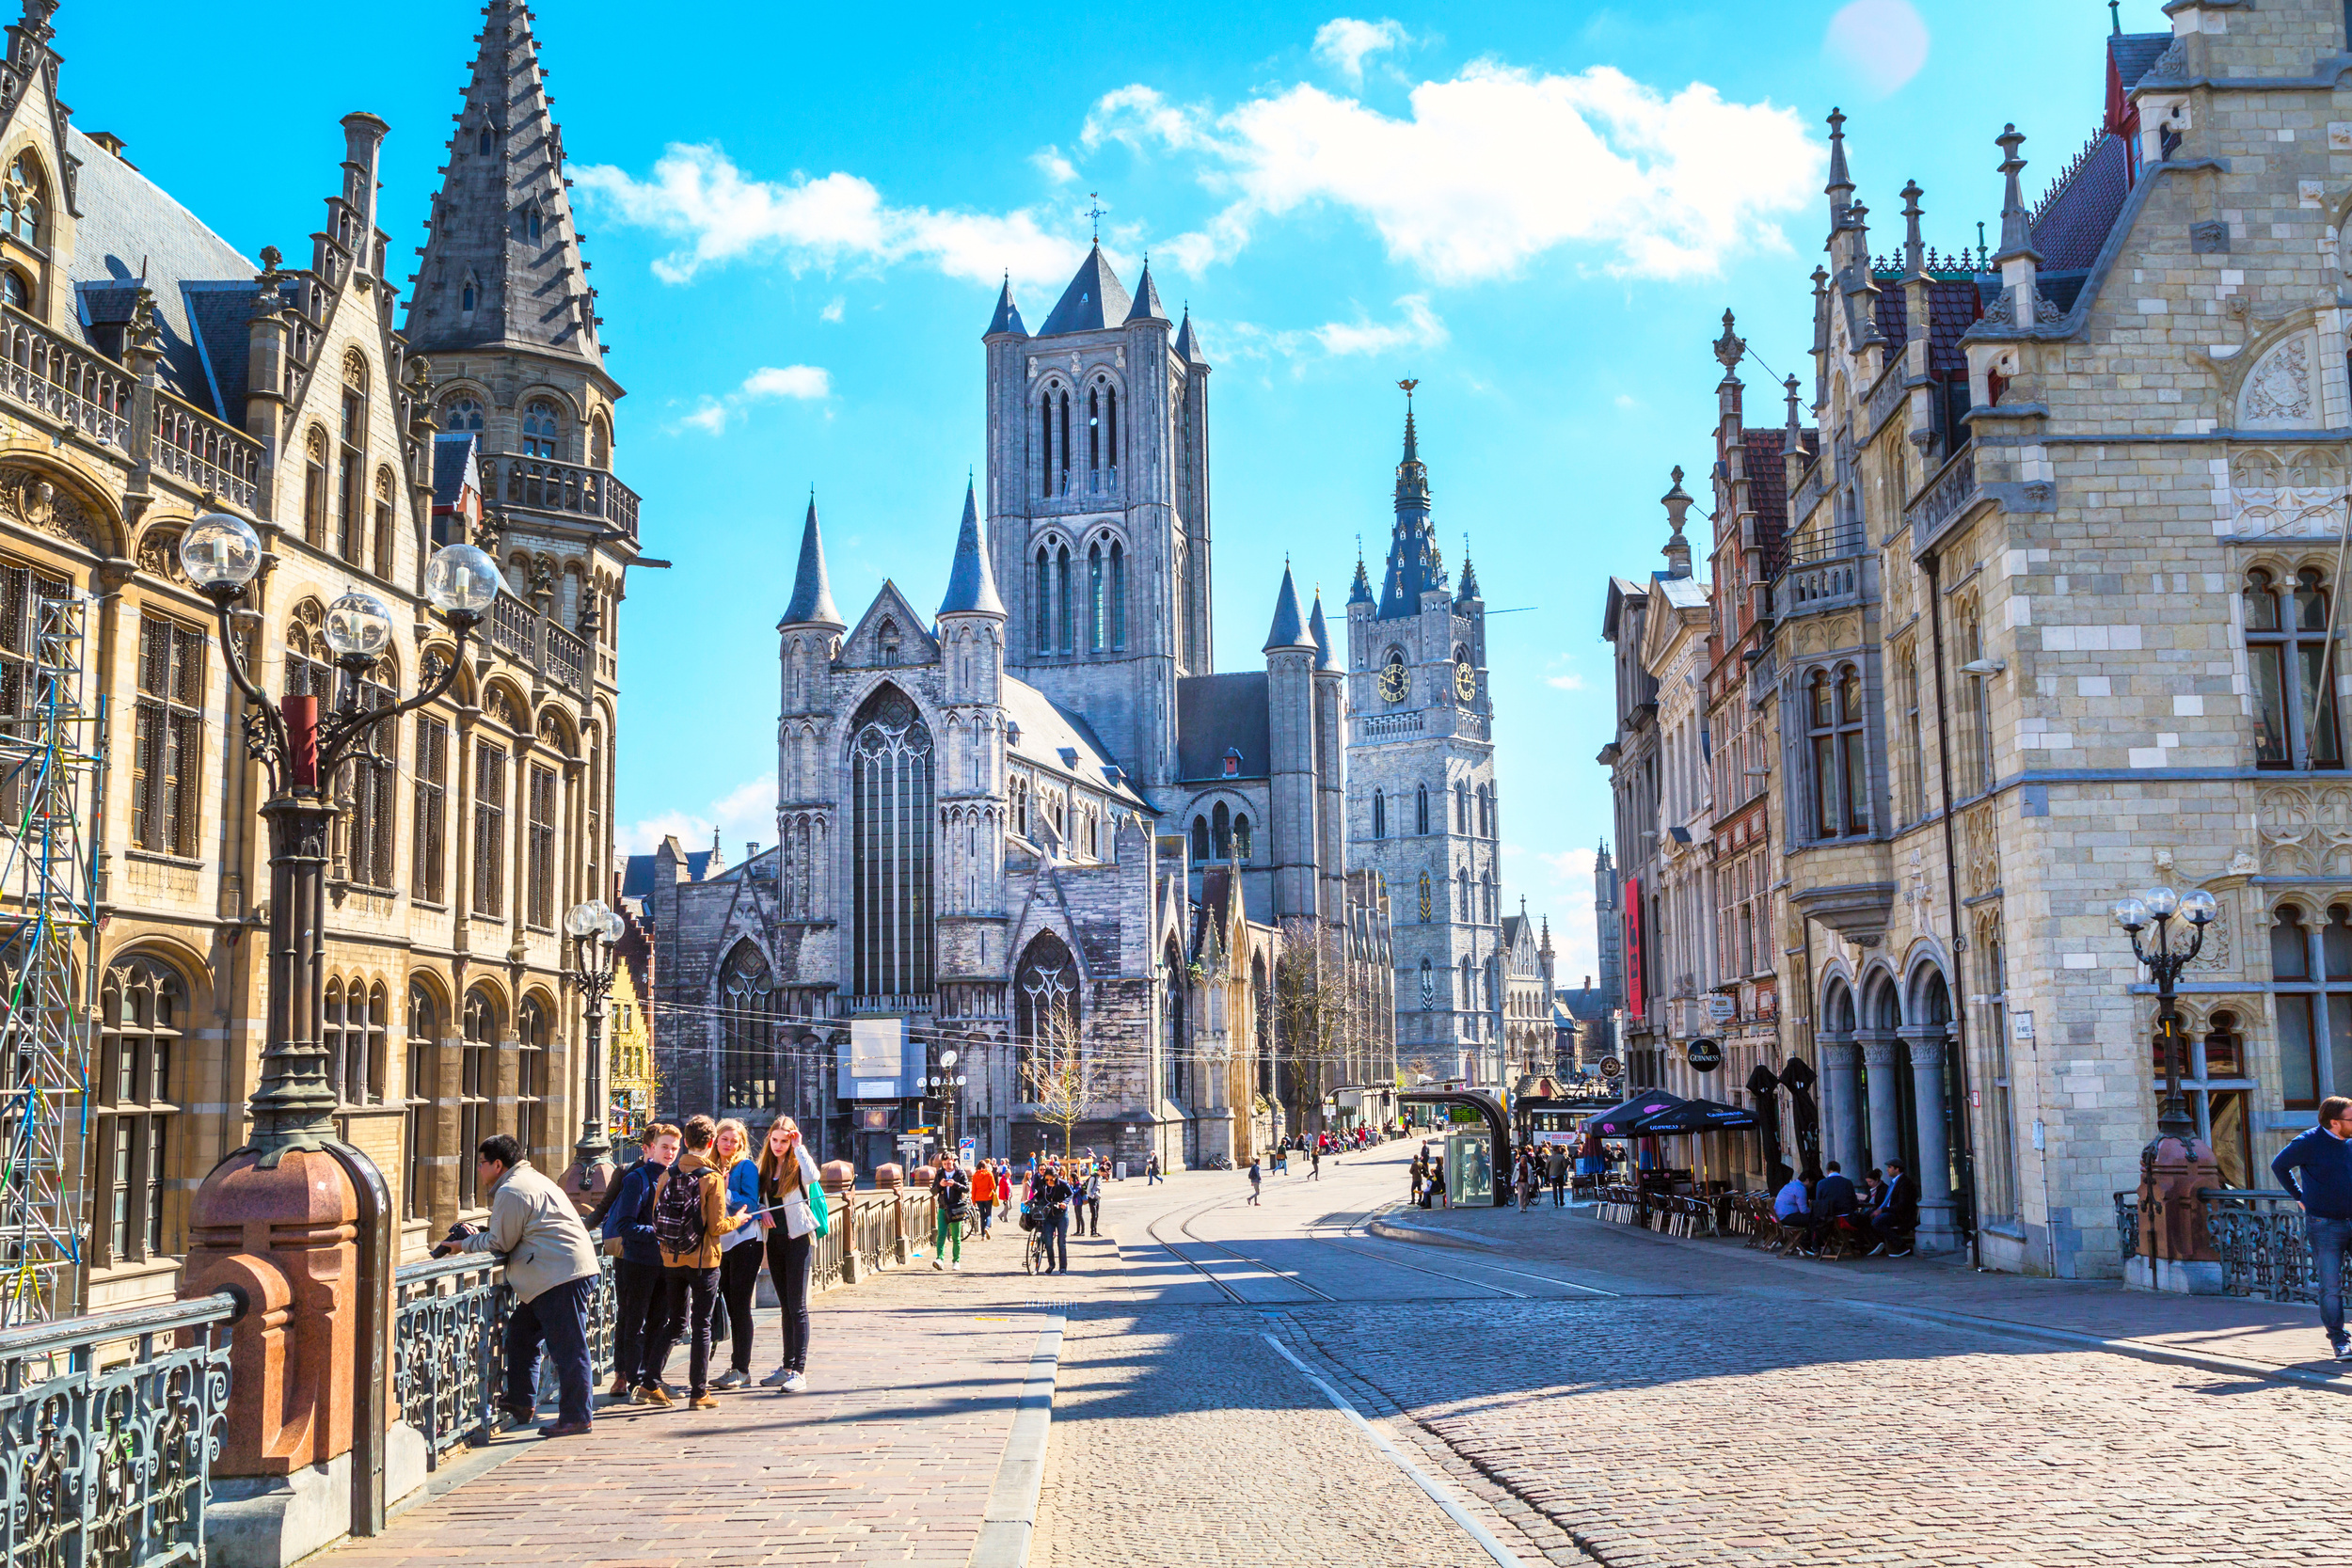 <p>Bruge might be the more popular medieval town in Belgium, but Ghent is a tad bigger and has more of a “city” feel. Take a cruise on the canal, have coffee at one of the many outdoor cafes, or have a wander and bask in the springtime weather.</p><p>You may also like: <a href='https://www.yardbarker.com/lifestyle/articles/easy_money_20_simple_ways_to_save_a_little_extra_cash_013024/s1__37505604'>Easy money: 20 simple ways to save a little extra cash</a></p>